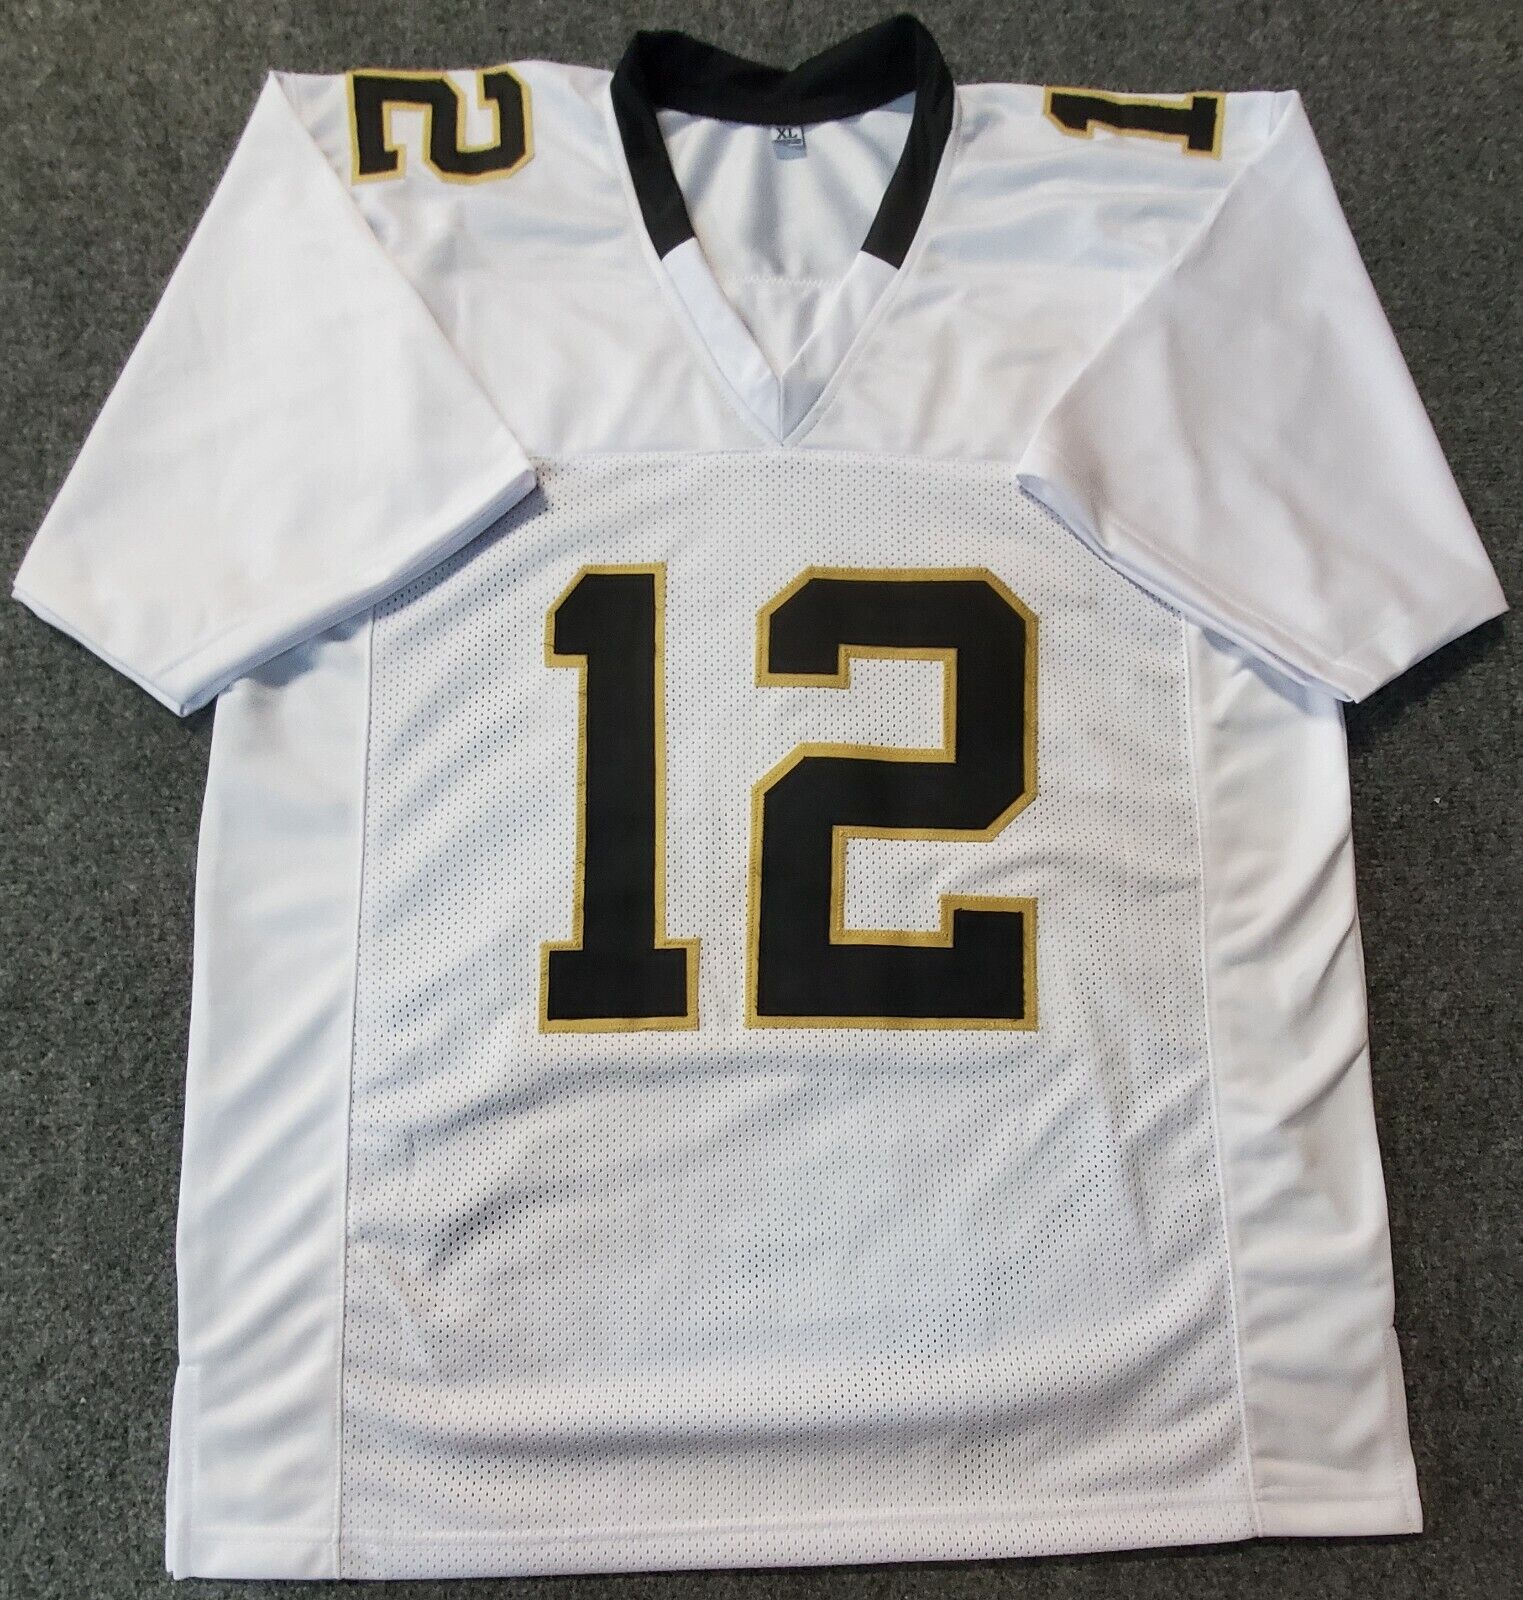 MVP Authentics New Orleans Saints Marques Colston Autographed Signed Jersey Jsa Coa 117 sports jersey framing , jersey framing